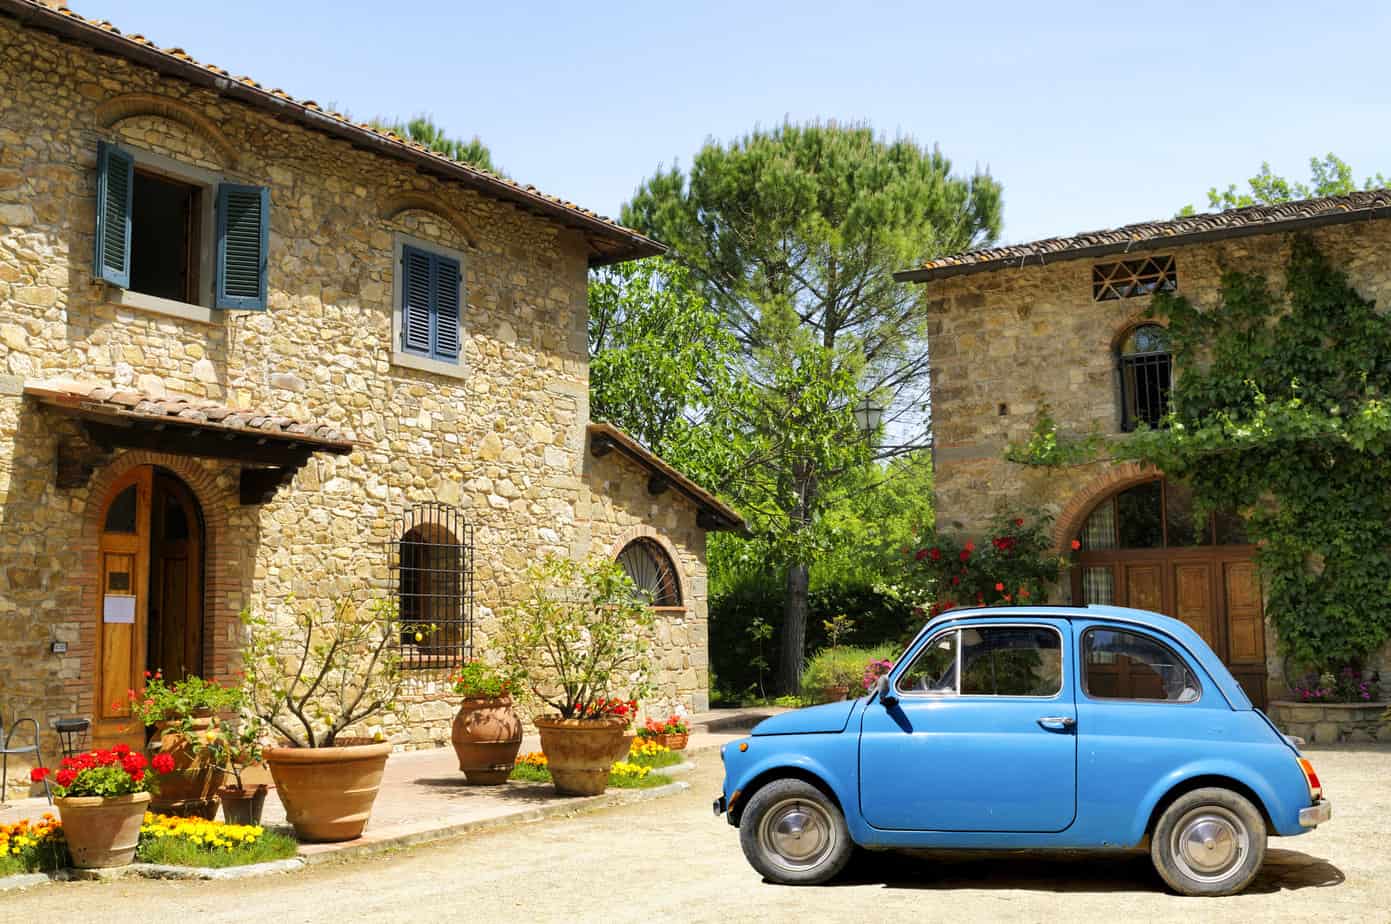 a blue rental car parked in front of a stone building in Italy.